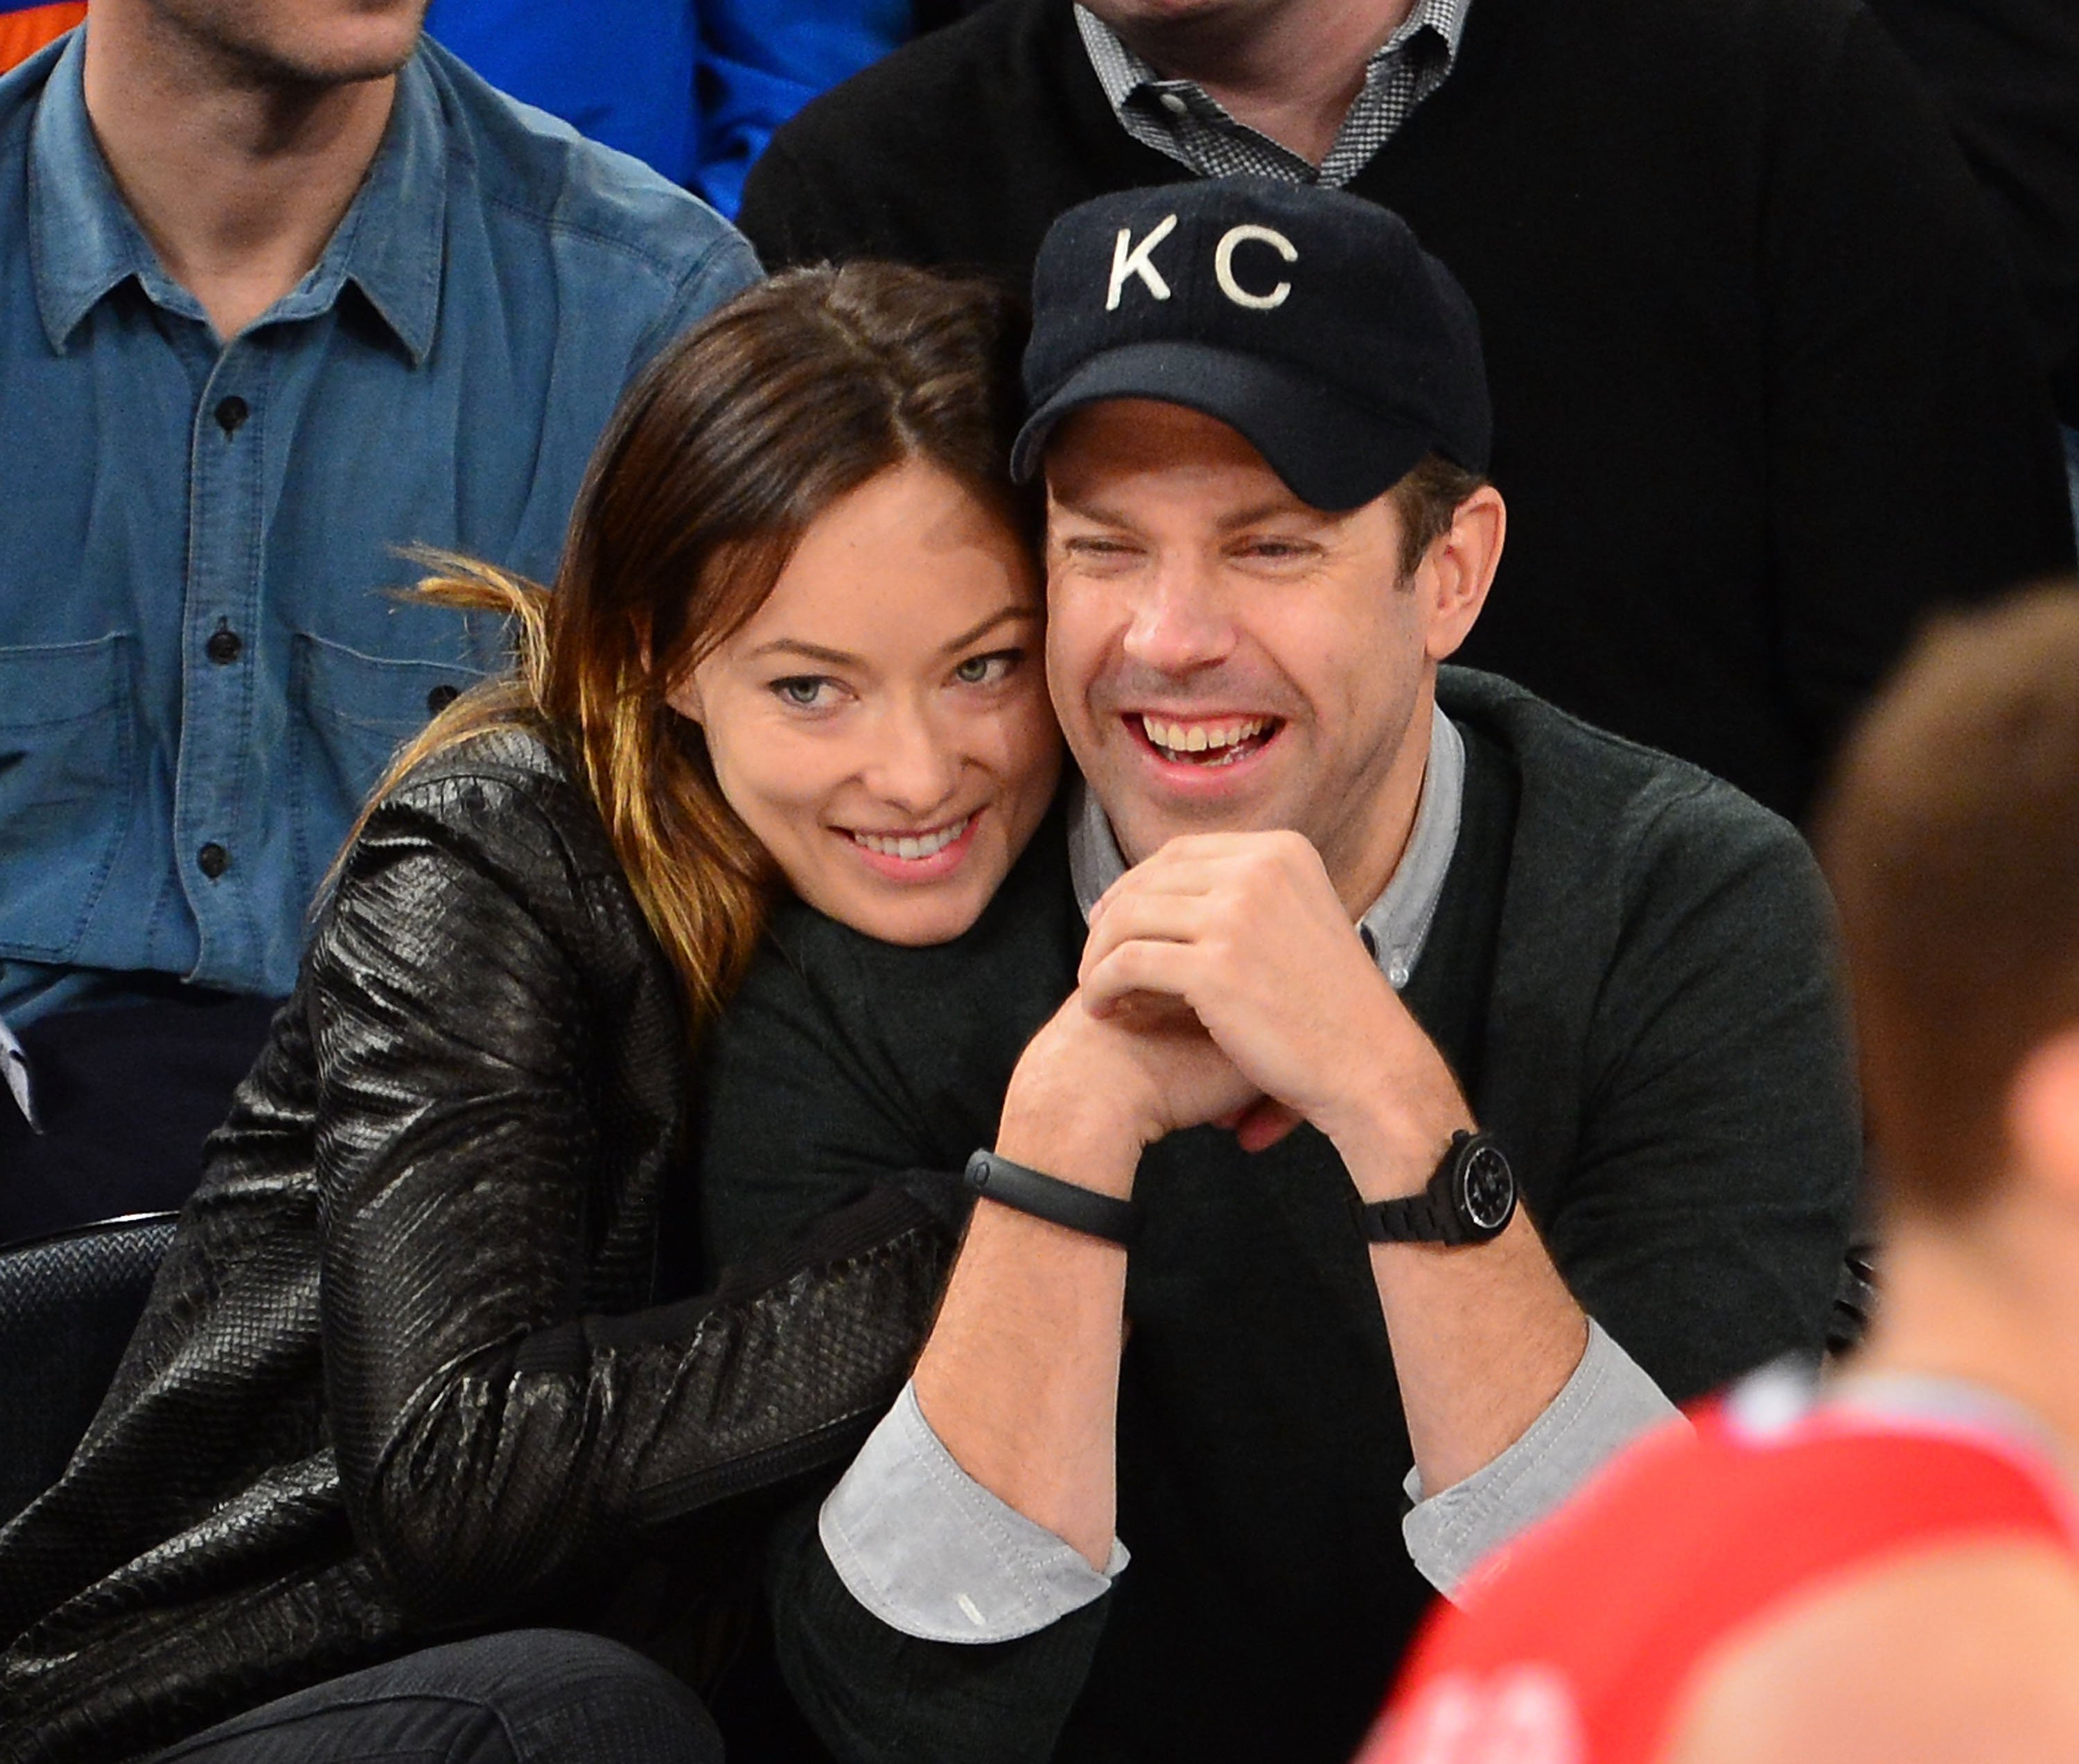 Olivia Wilde and Jason Sudeikis attend the Los Angeles Clippers vs New York Knicks game at Madison Square Garden on February 10, 2013, in New York City. 